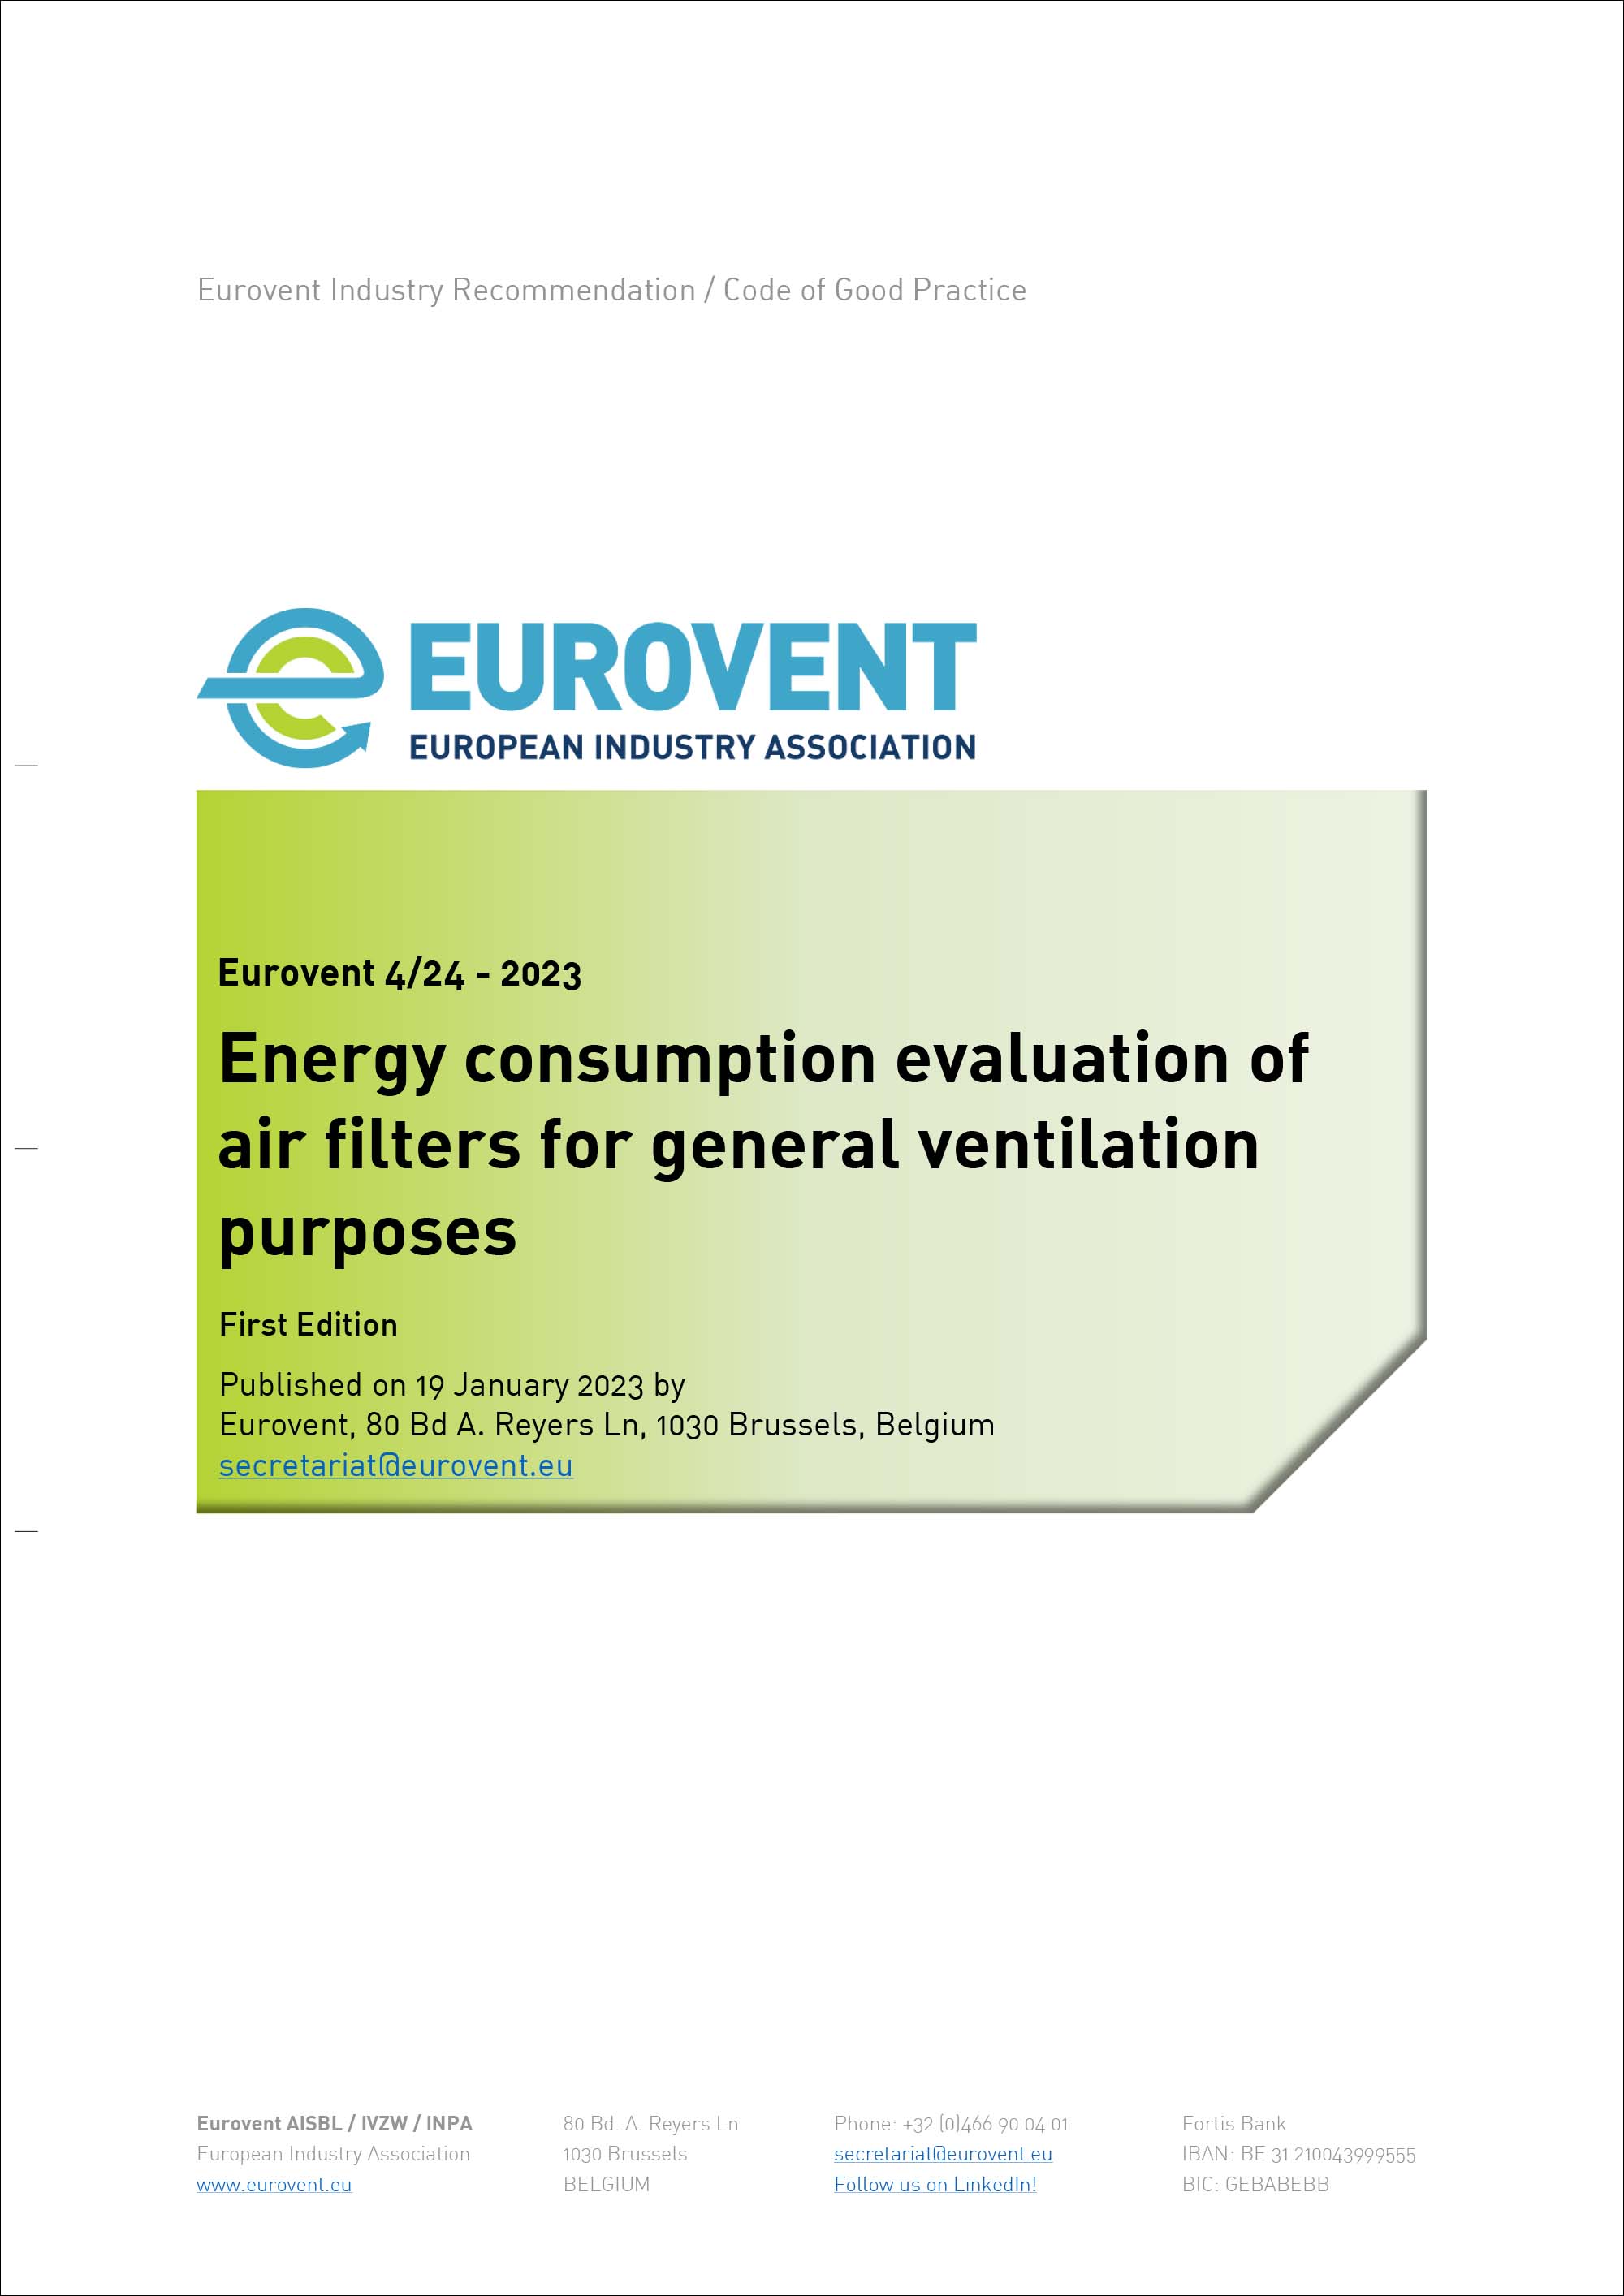 Eurovent 4/24 - 2023: Energy consumption evaluation of air filters for general ventilation purposes - First Edition - English